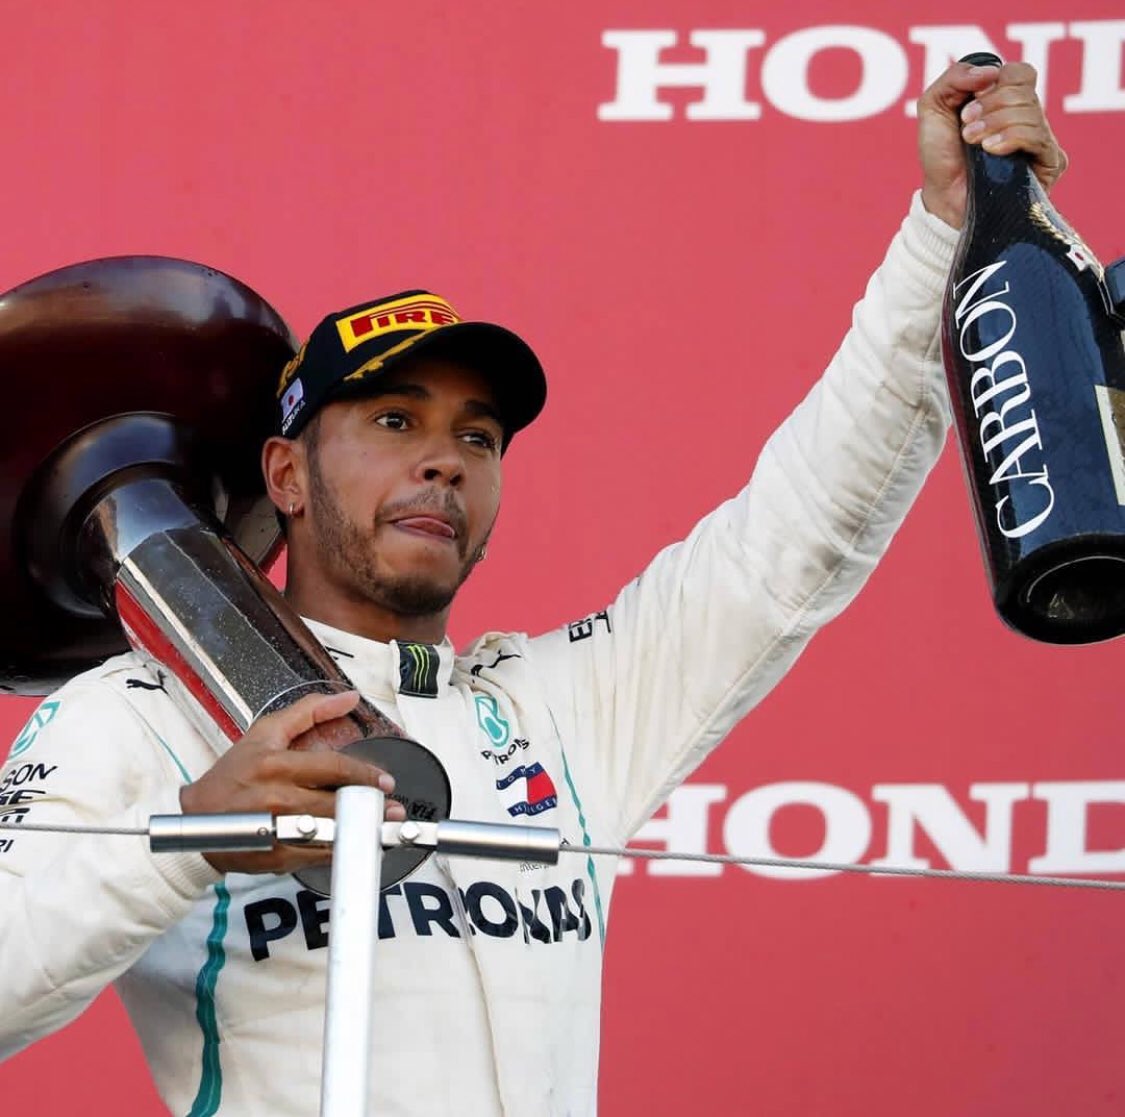 UPDATE 2-Motor racing-Hamilton on brink of fifth title after Japan win